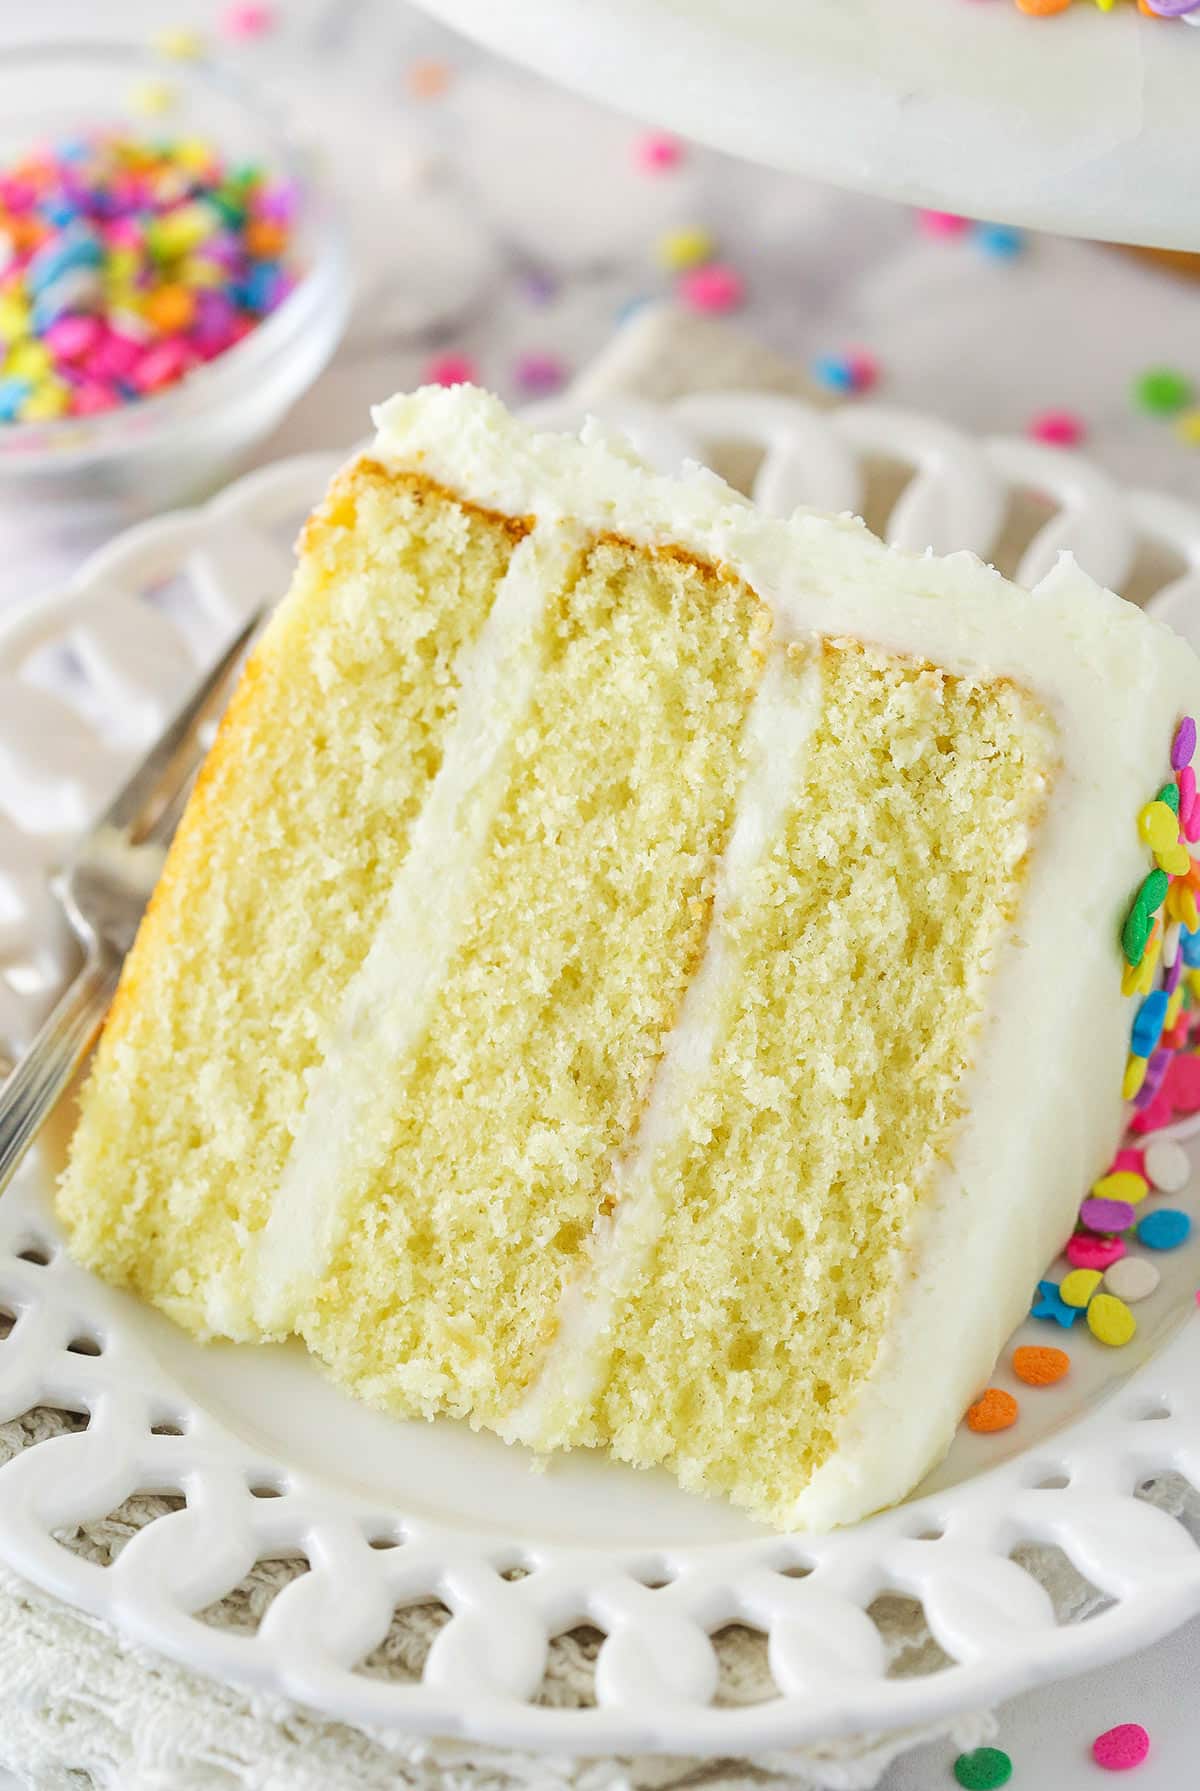 A slice of moist vanilla layer cake on a plate with a fork.